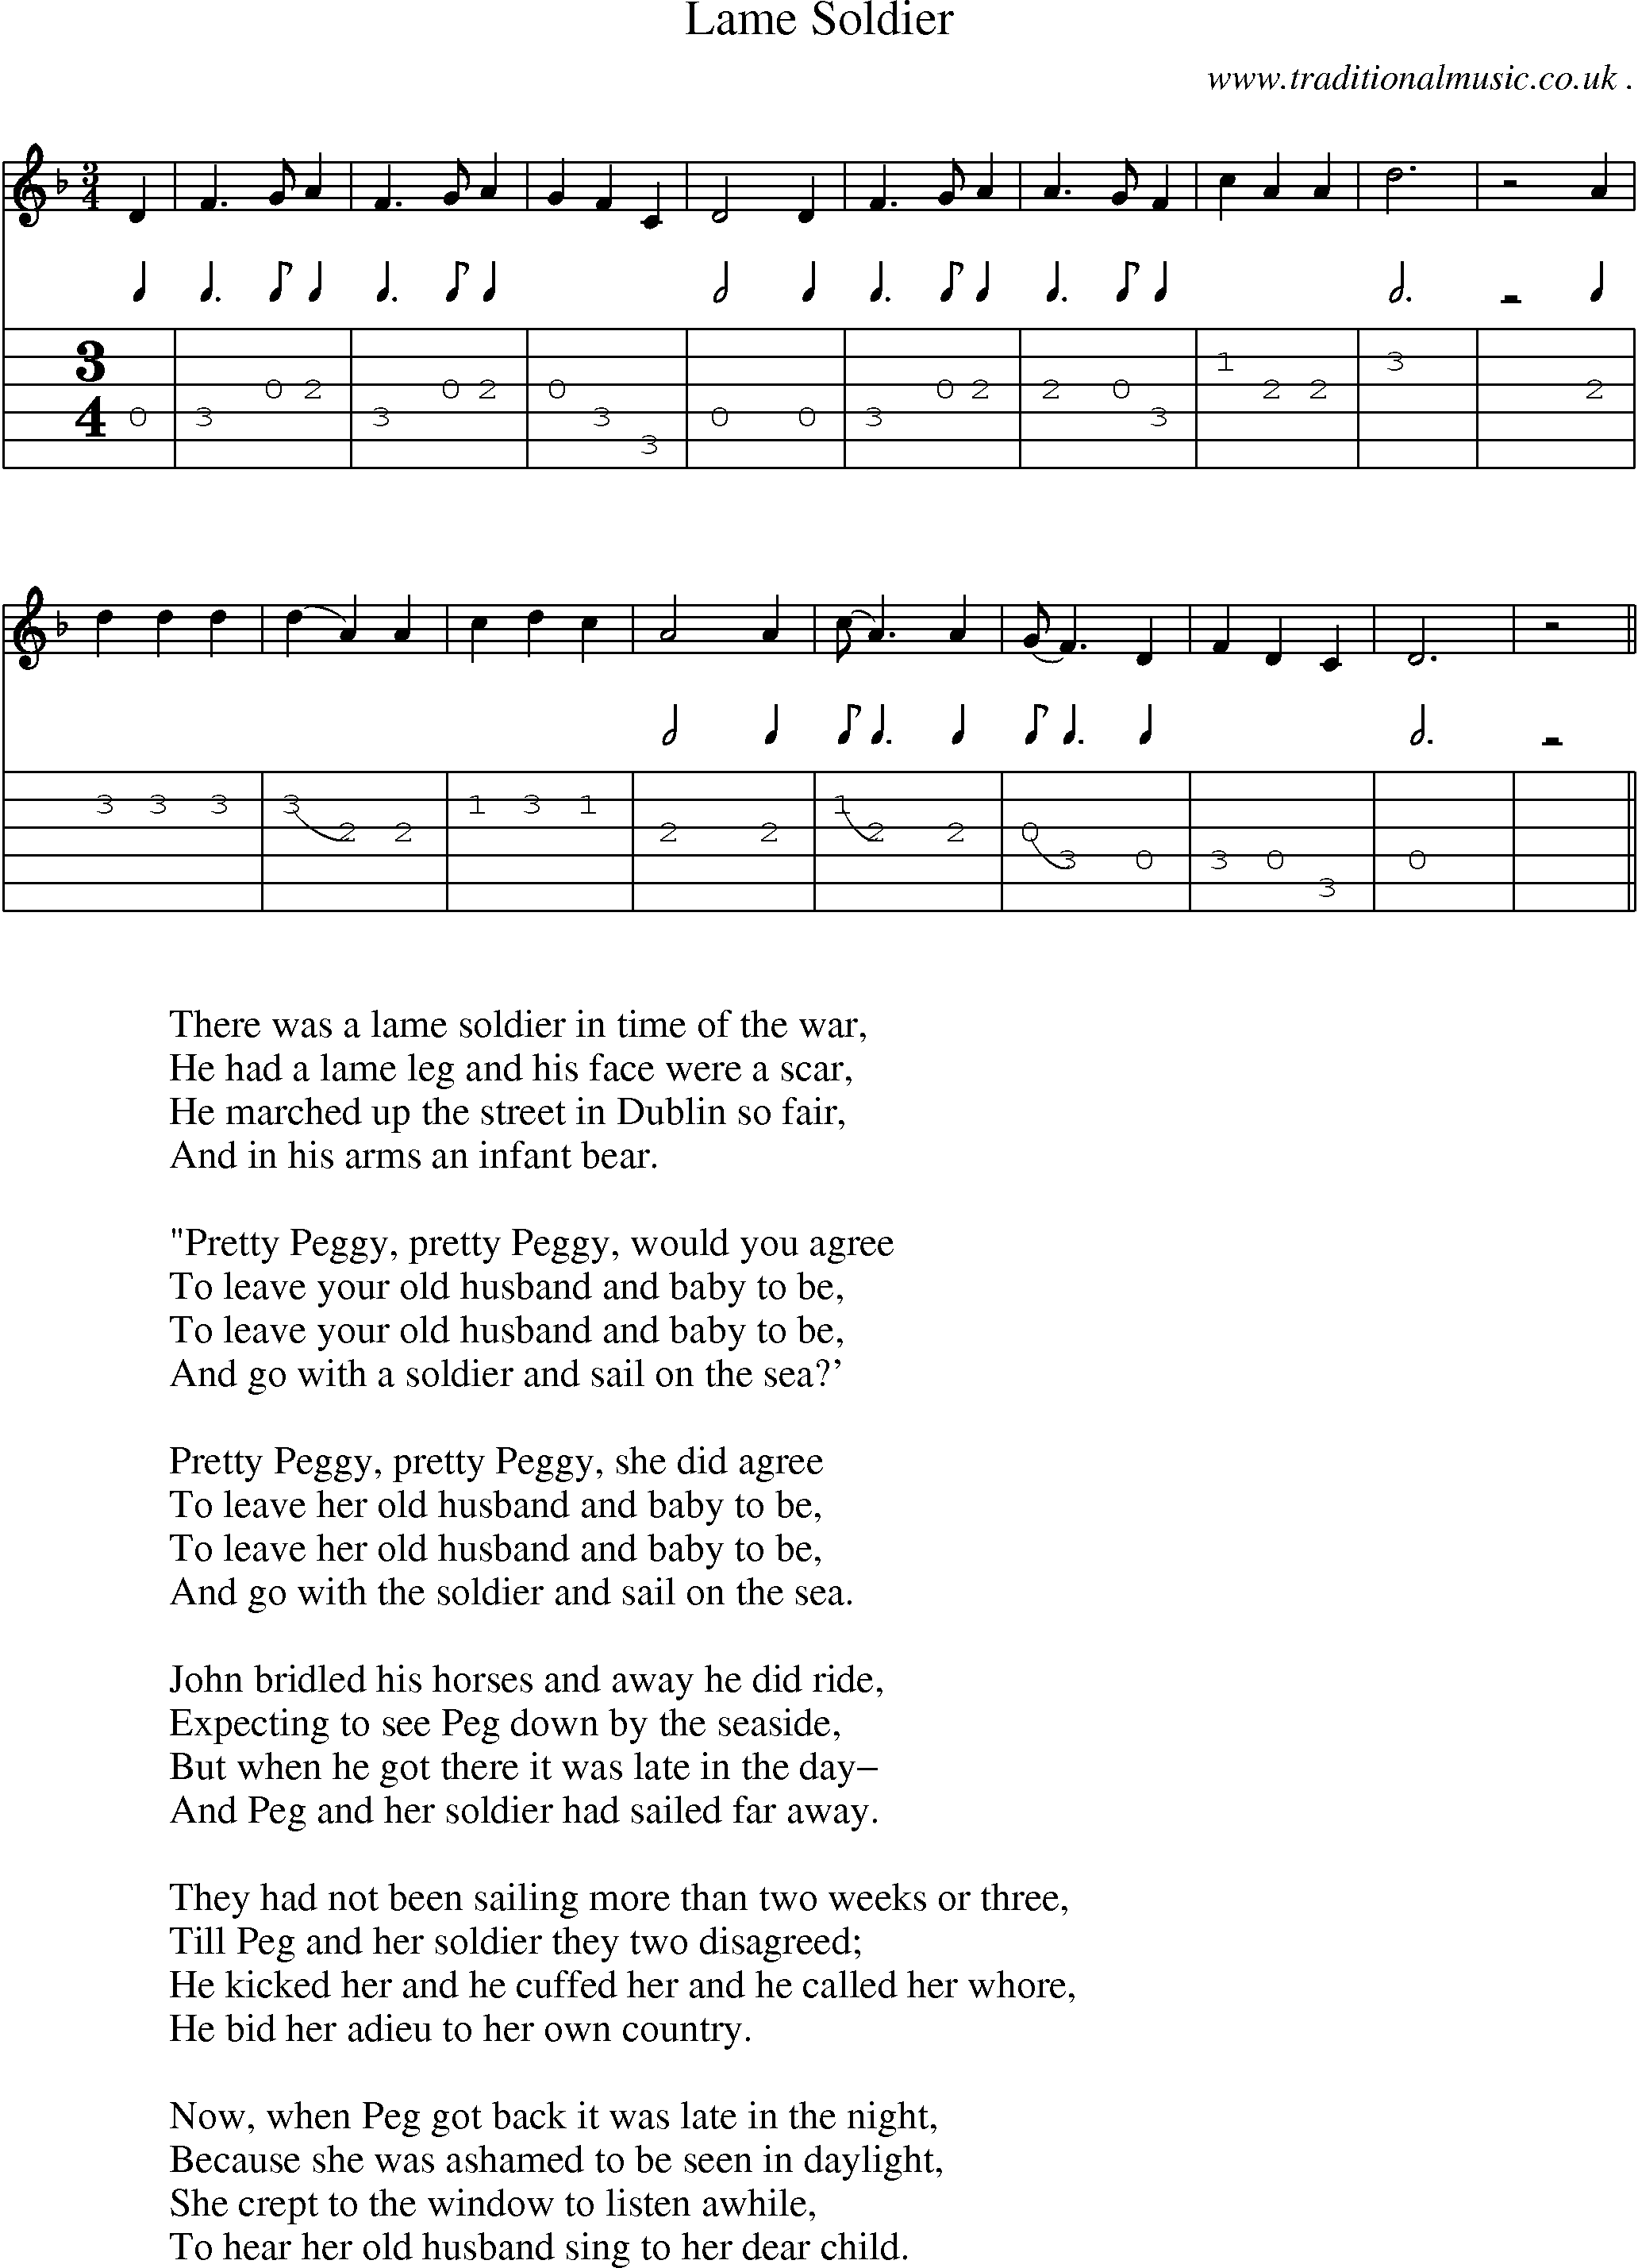 Sheet-Music and Guitar Tabs for Lame Soldier